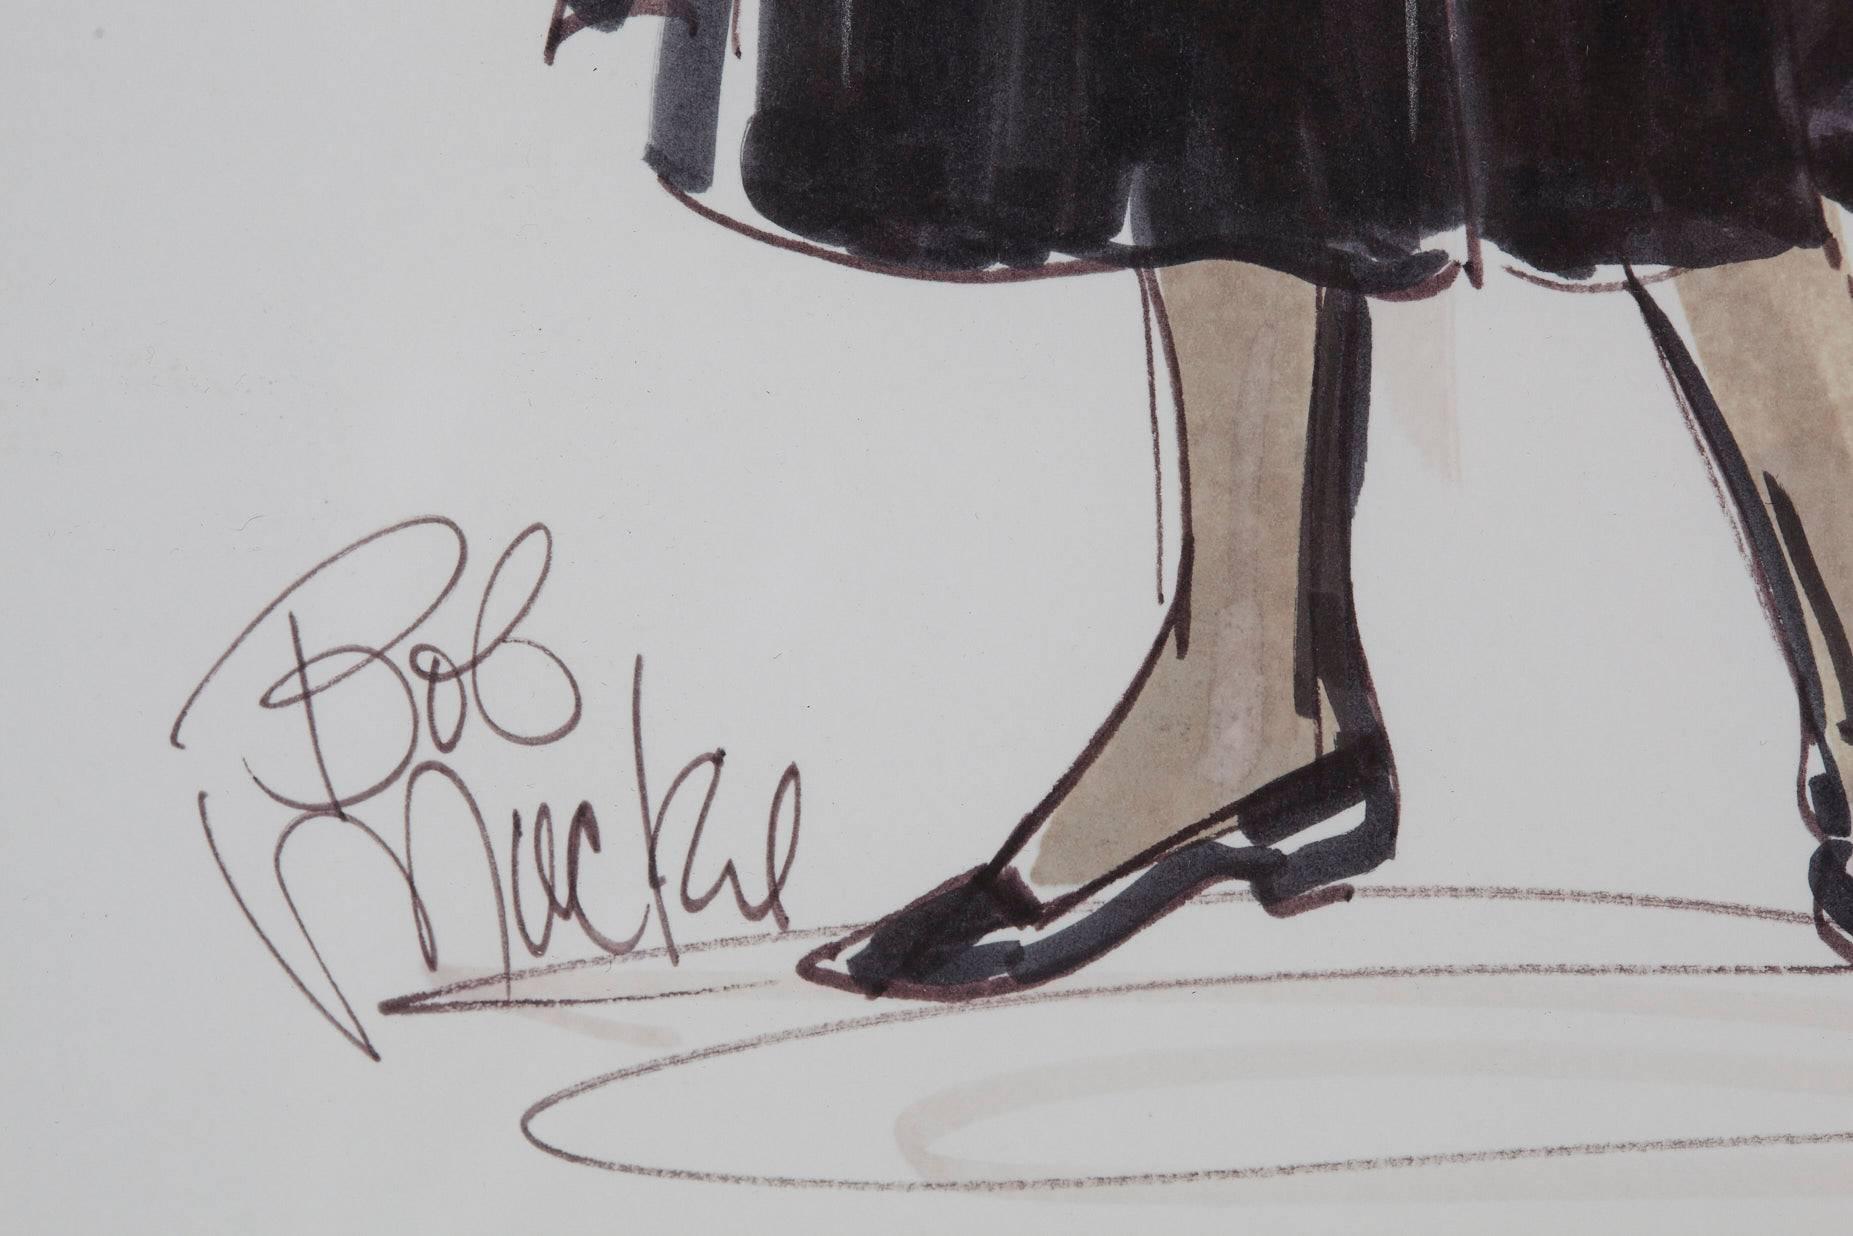 Mid-Century Modern Signed Bob Mackie Fashion Drawing #2 for Rosemary Clooney from the Estate of RC